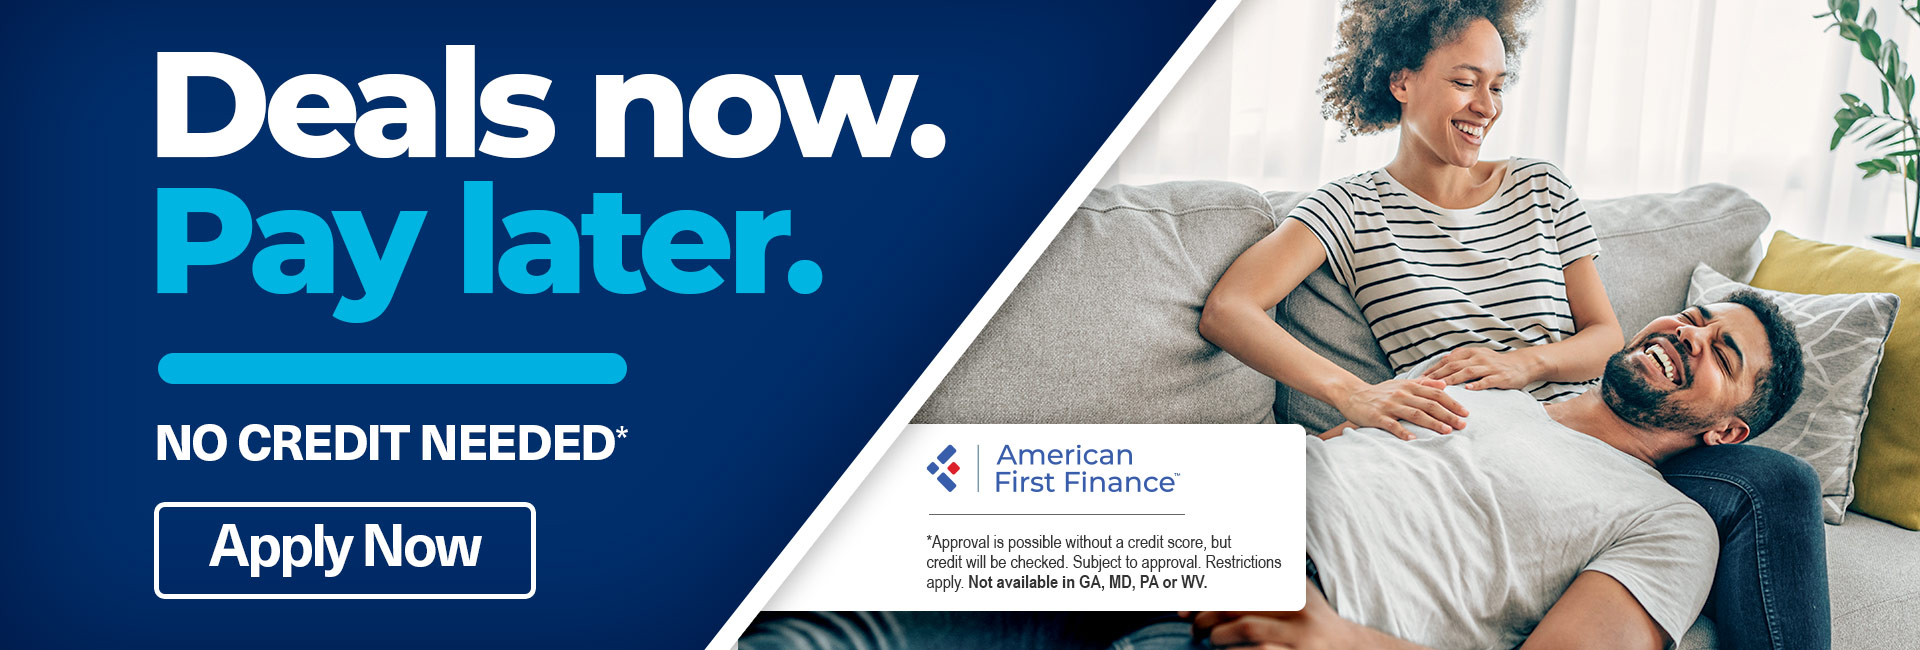 A designed banner with an image of a man resting his head in a woman’s lap, sitting on a couch together, with text that reads “Deals now. Pay later. No credit Needed*. Apply now.” Asterisk text reads American First Finance: “*Approval is possible without a credit score, but credit will be checked. Subject to approval. Restrictions apply. Not available in GA, MD, PA, or WV.